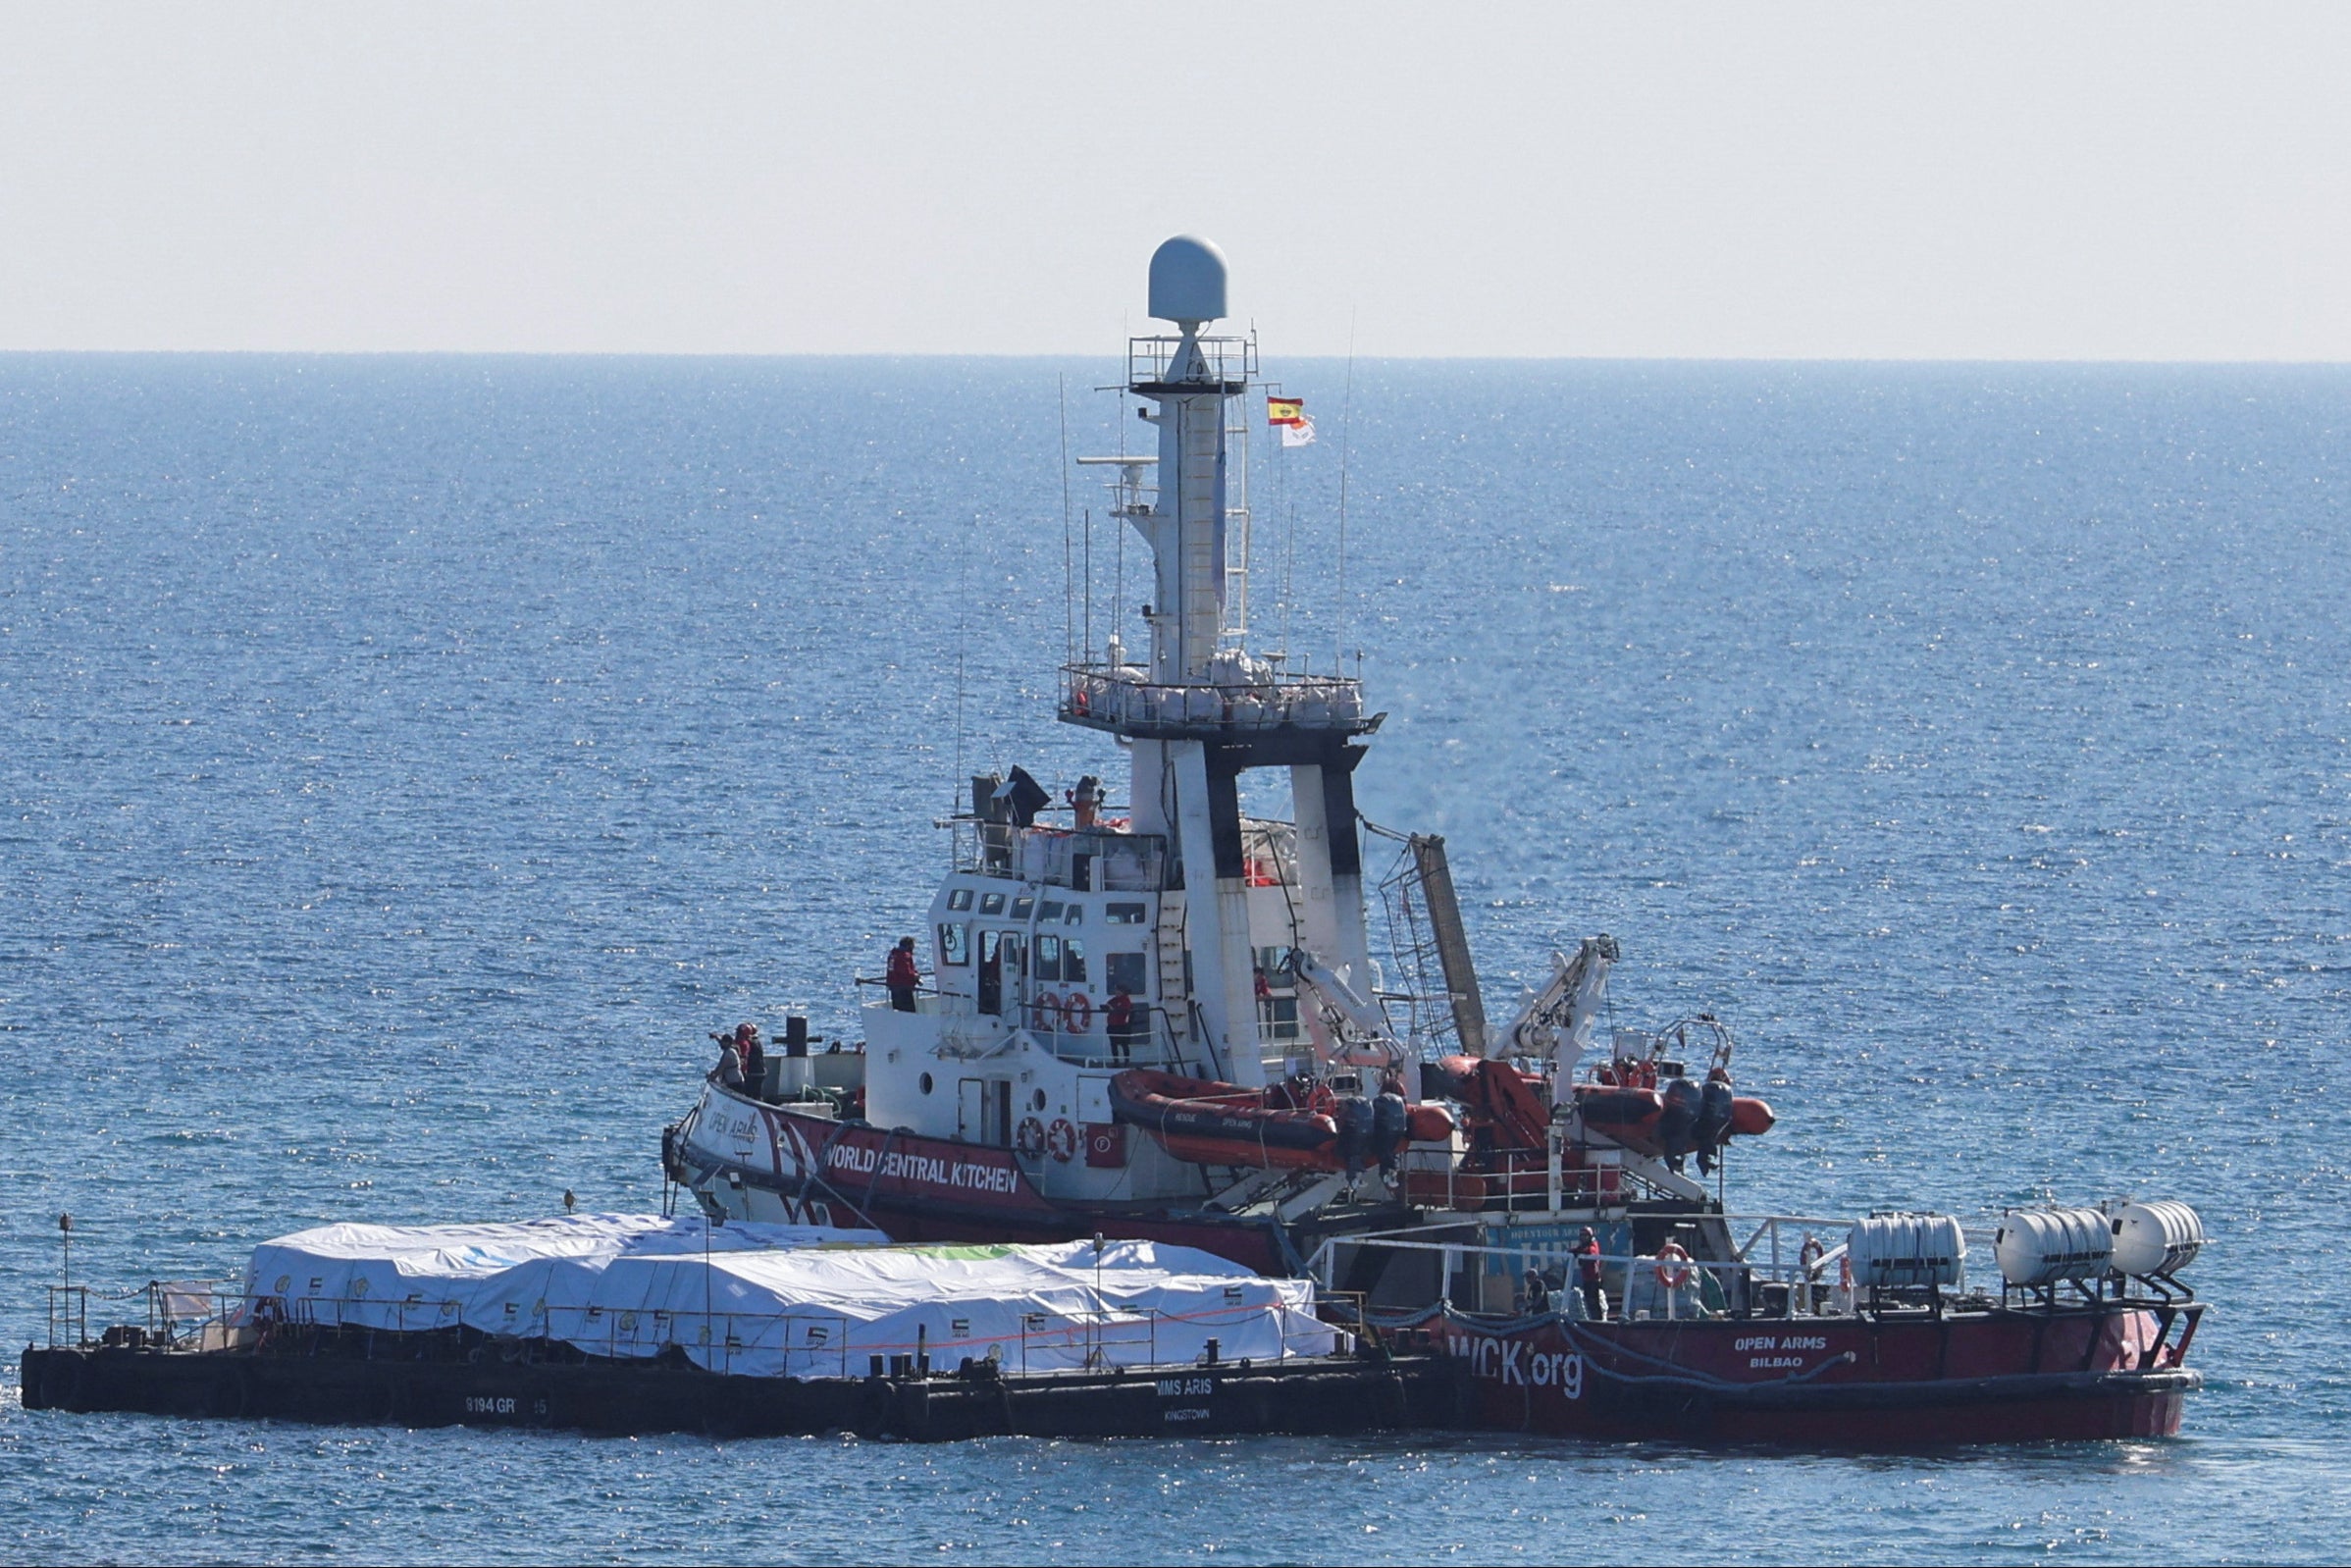 The ‘Open Arms’, a rescue vessel, departs with humanitarian aid for Gaza from Larnaca, Cyprus